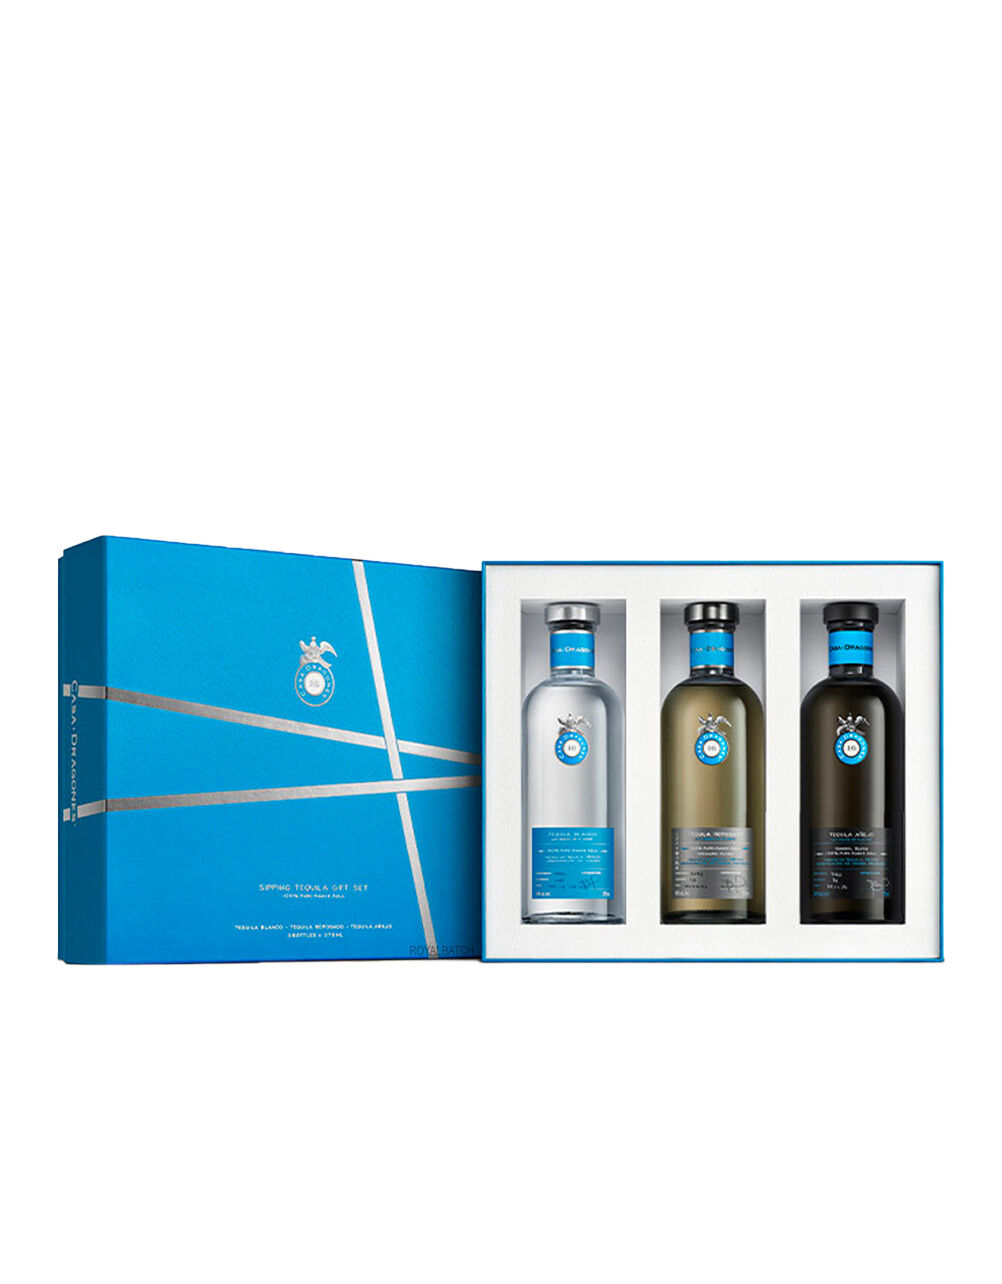 Casa Dragones Sipping Tequila Gift Set (3 Pack) 375ml